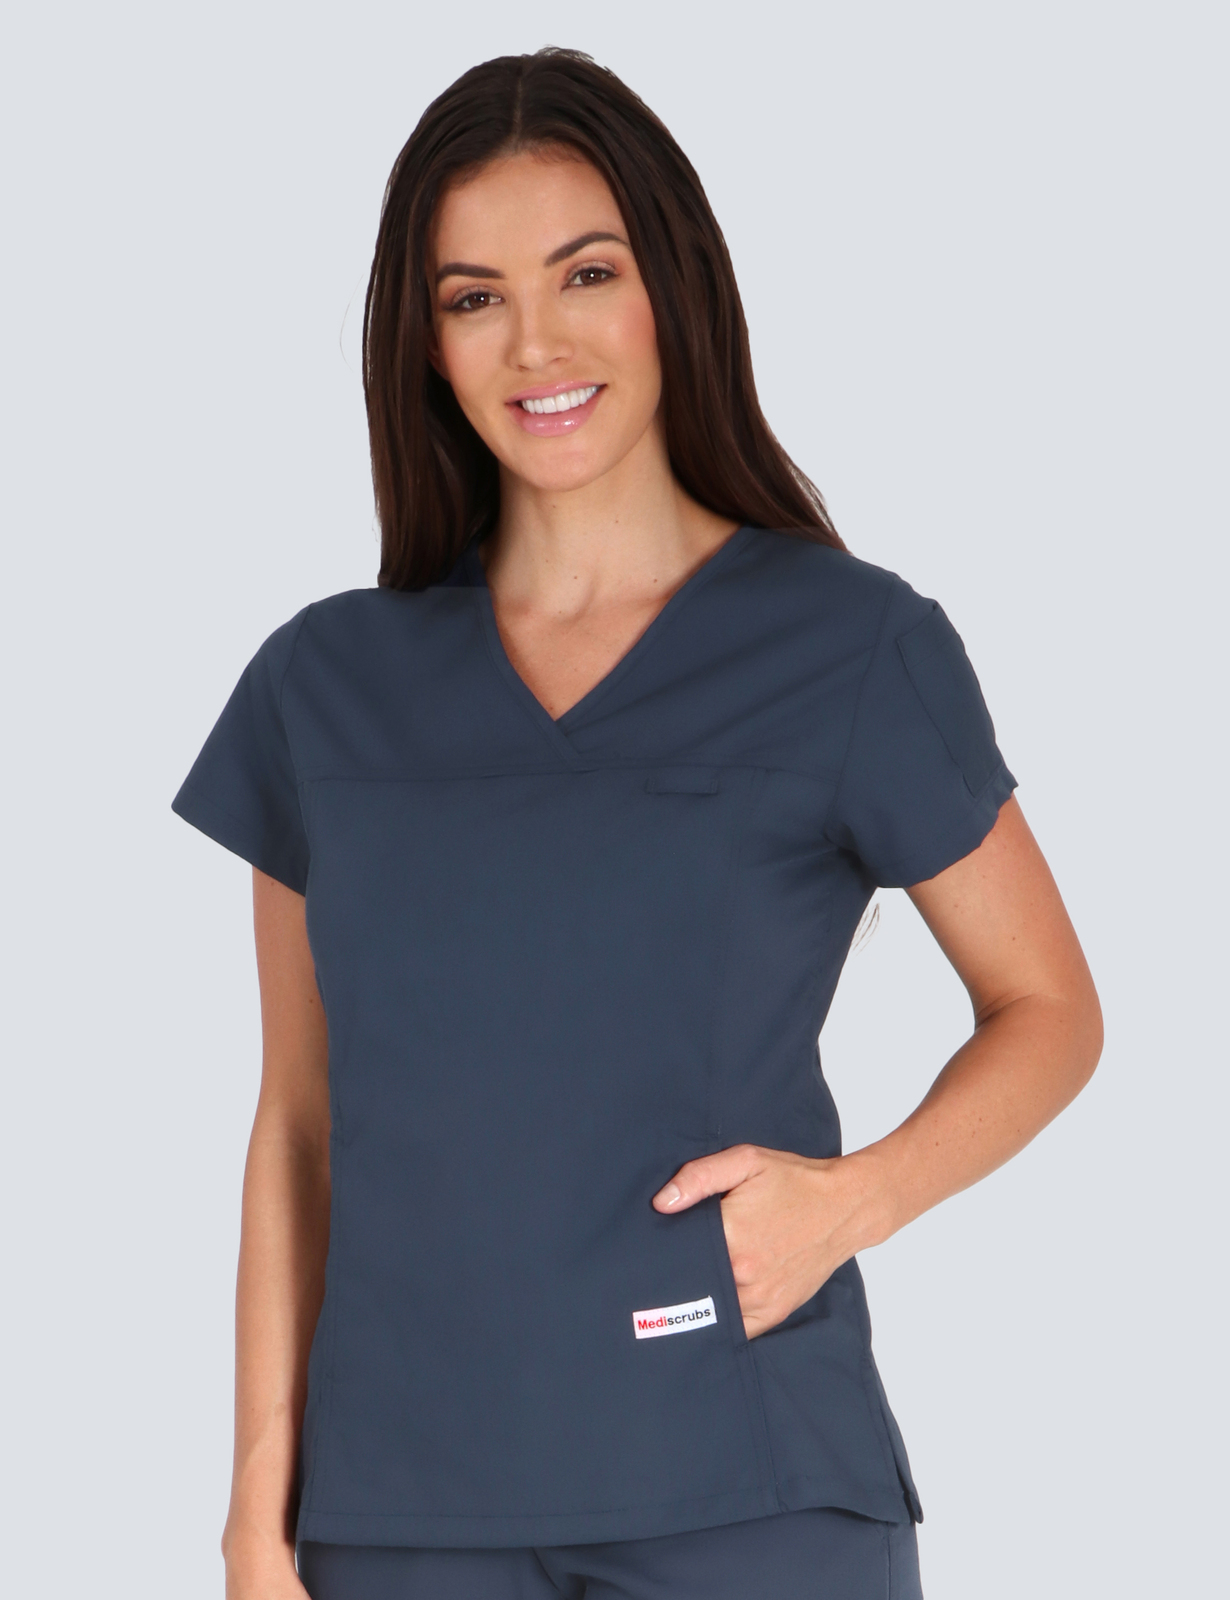 St Vincent's Hospital Emergency Department  Nurse Practitioner Candidate Uniform Top Only Bundle (Women's Fit Solid in Navy incl logos)